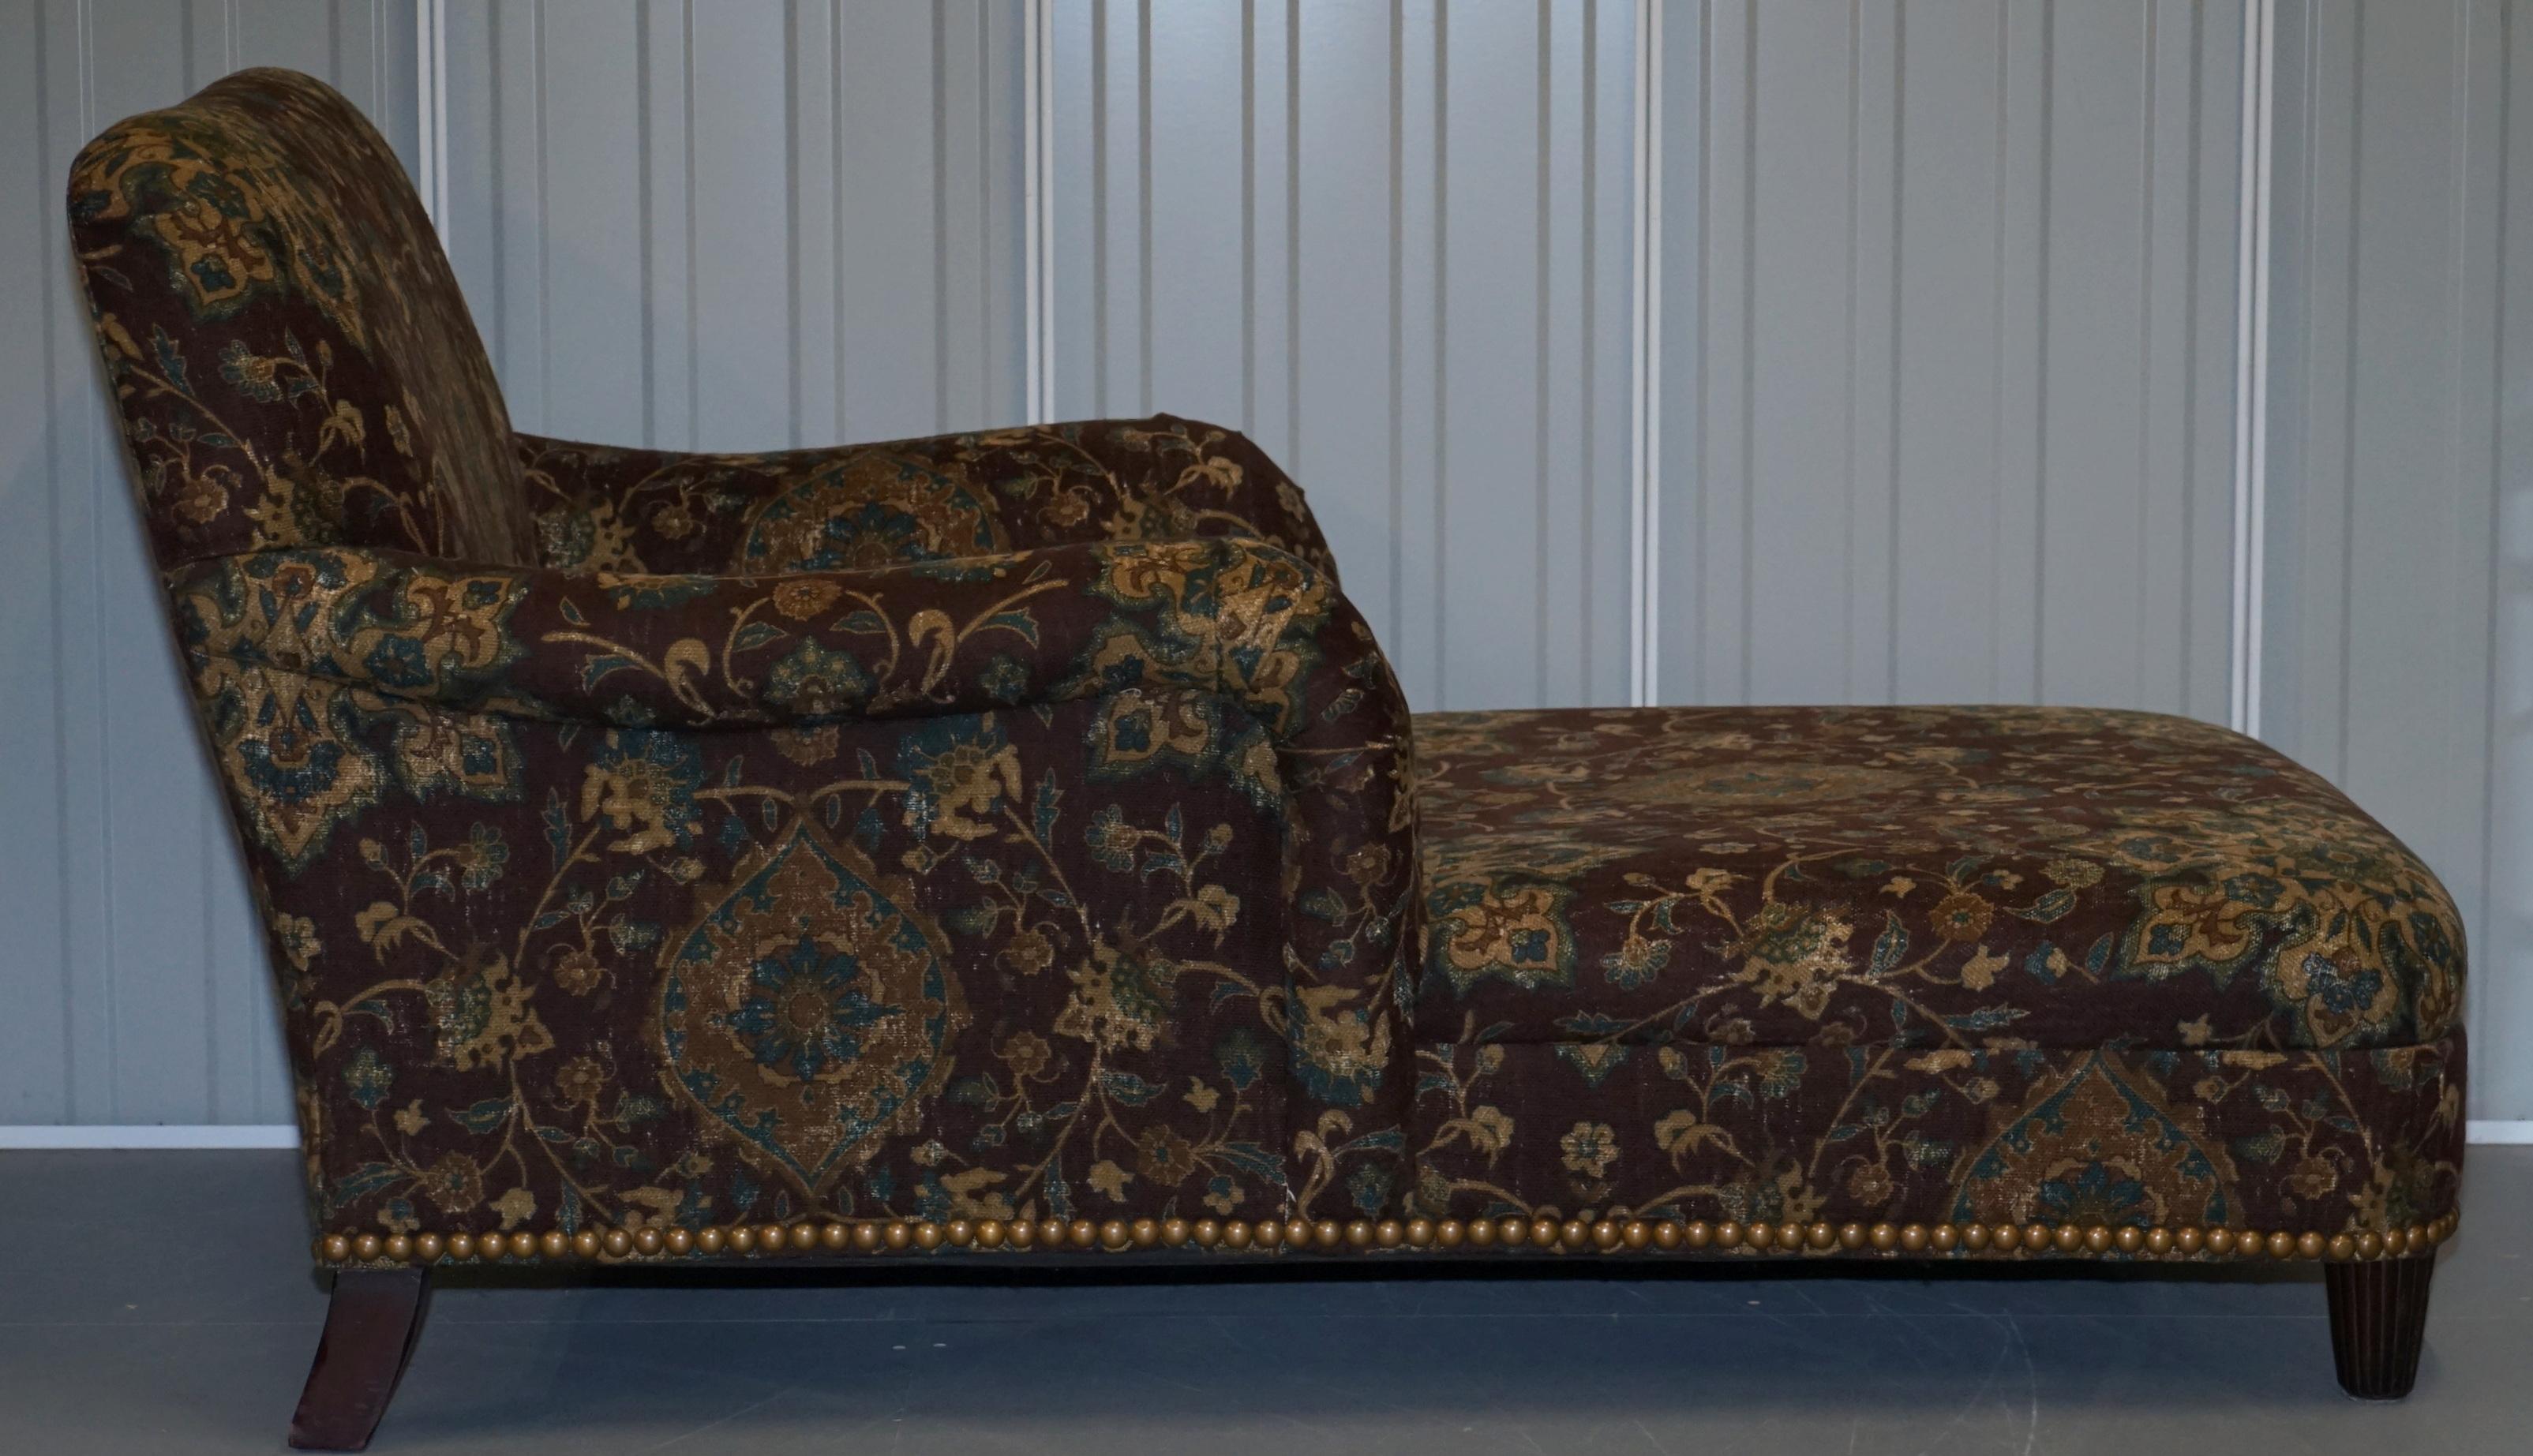 Large Oversized Ralph Lauren Chaise Lounge Sofa Armchair Floral Upholstery 6